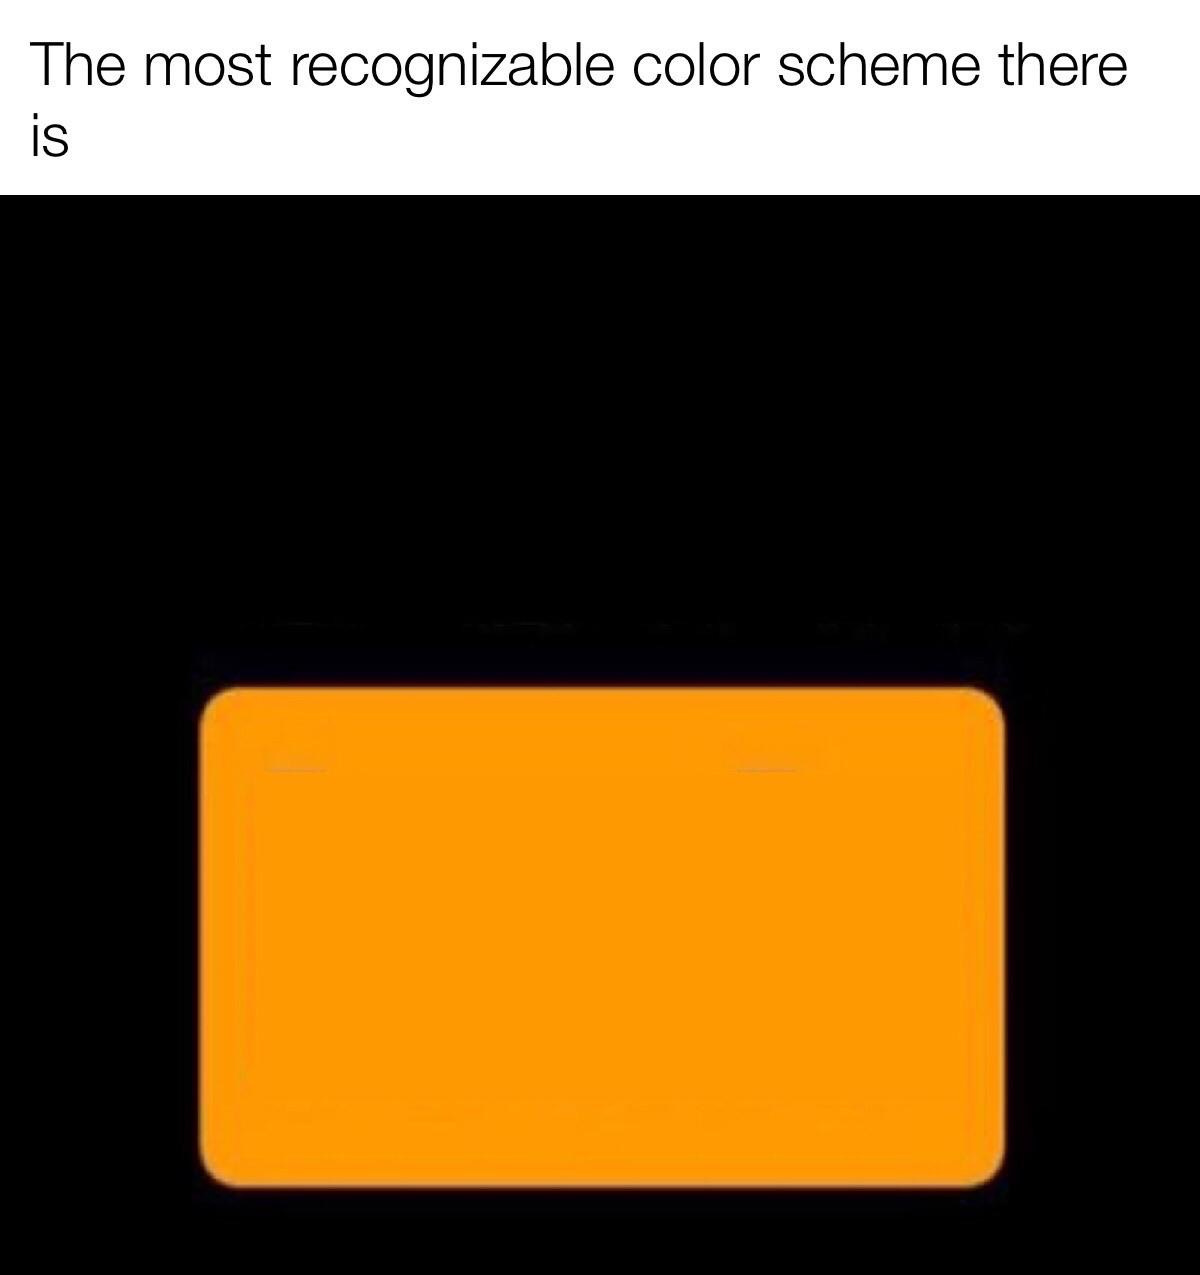 orange - The most recognizable color scheme there is